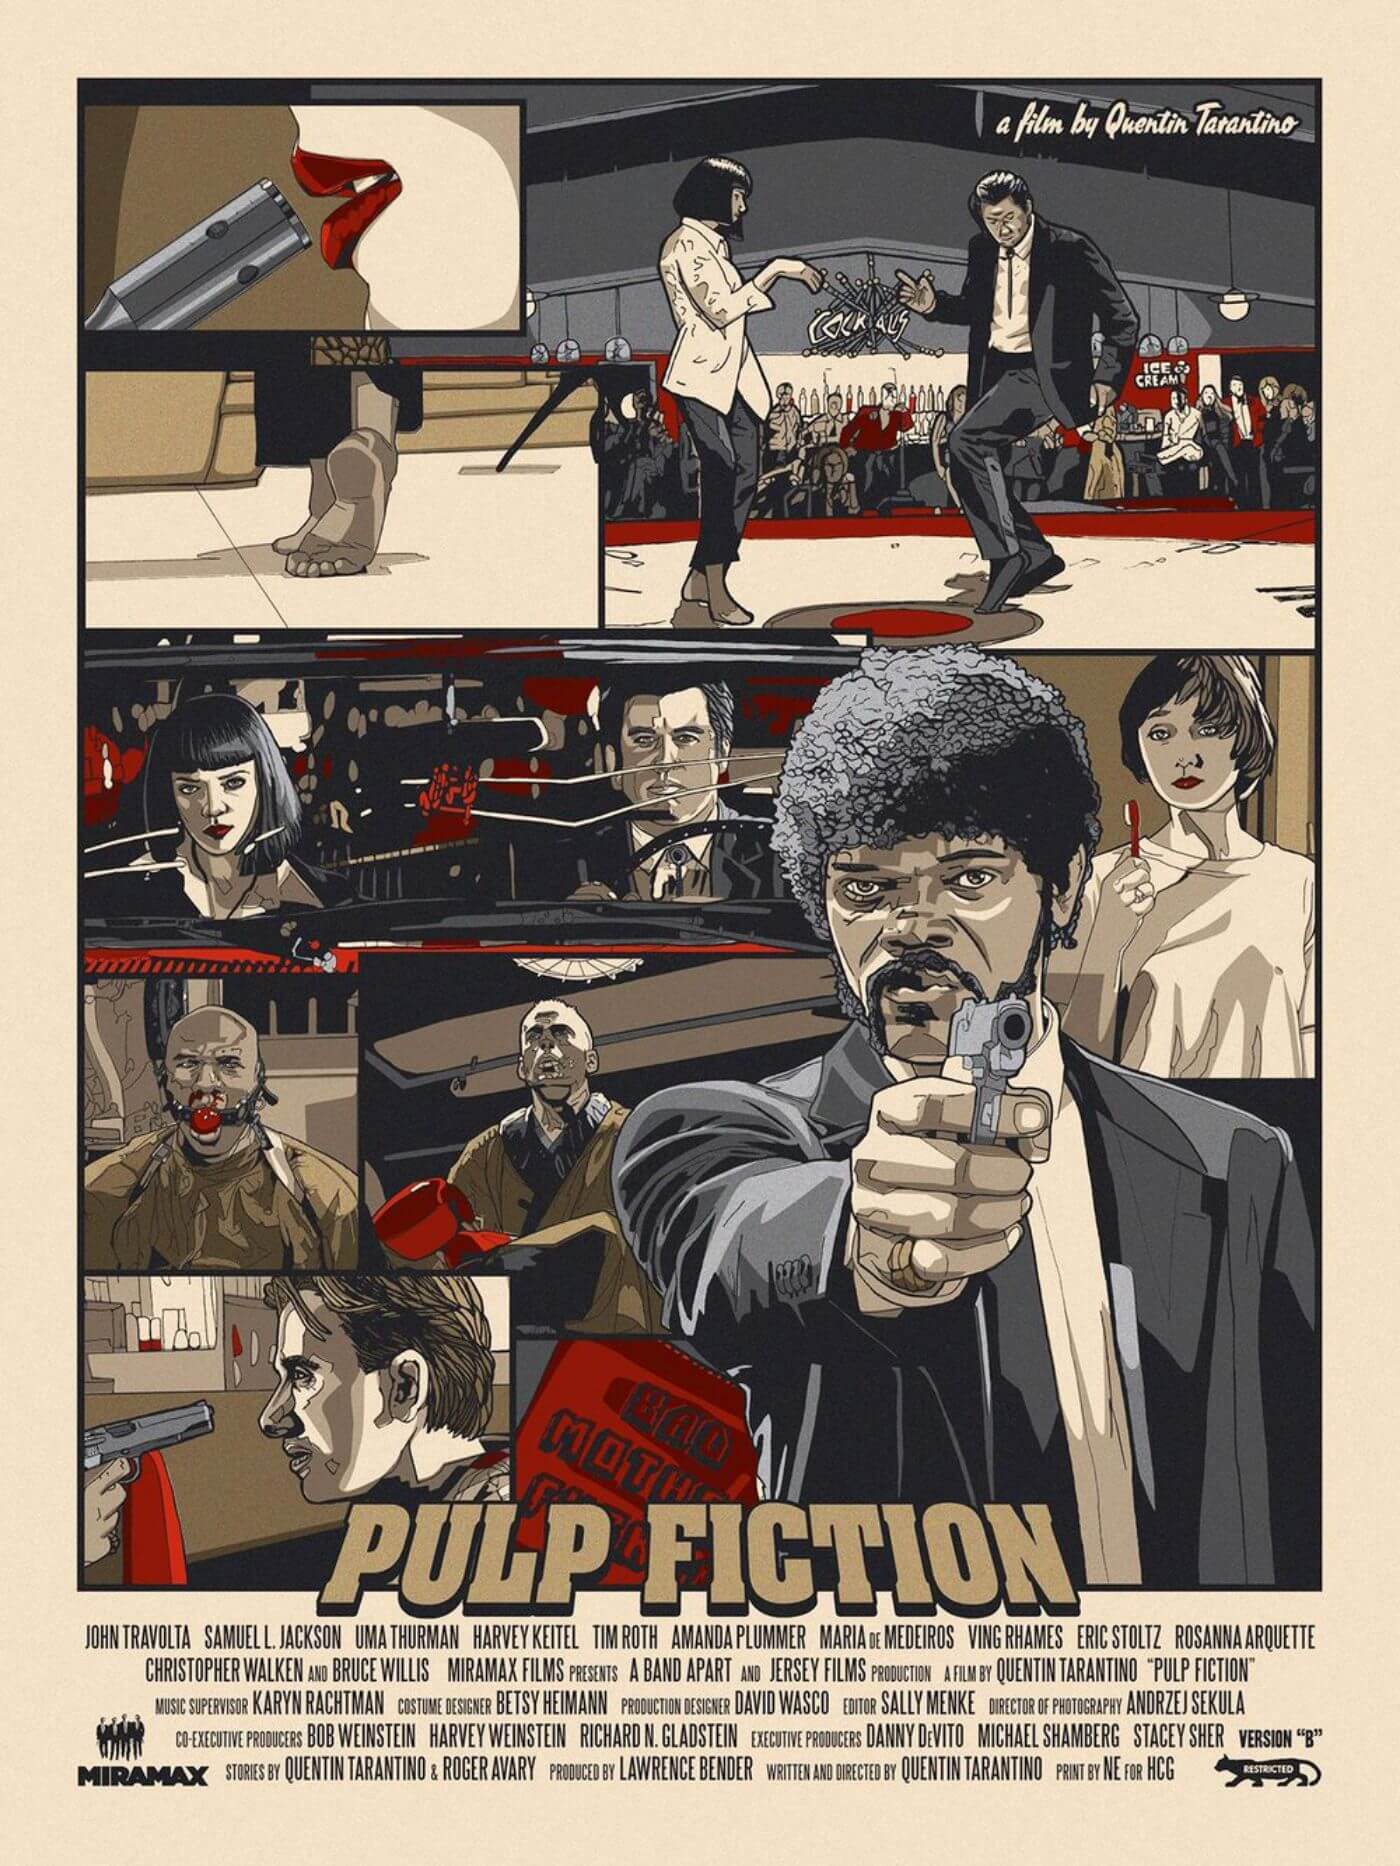 Pulp Fiction - Samuel L Jackson - Tallenge Quentin Tarantino Hollywood  Movie Art Poster Collection - Framed Prints by Joel Jerry, Buy Posters,  Frames, Canvas & Digital Art Prints